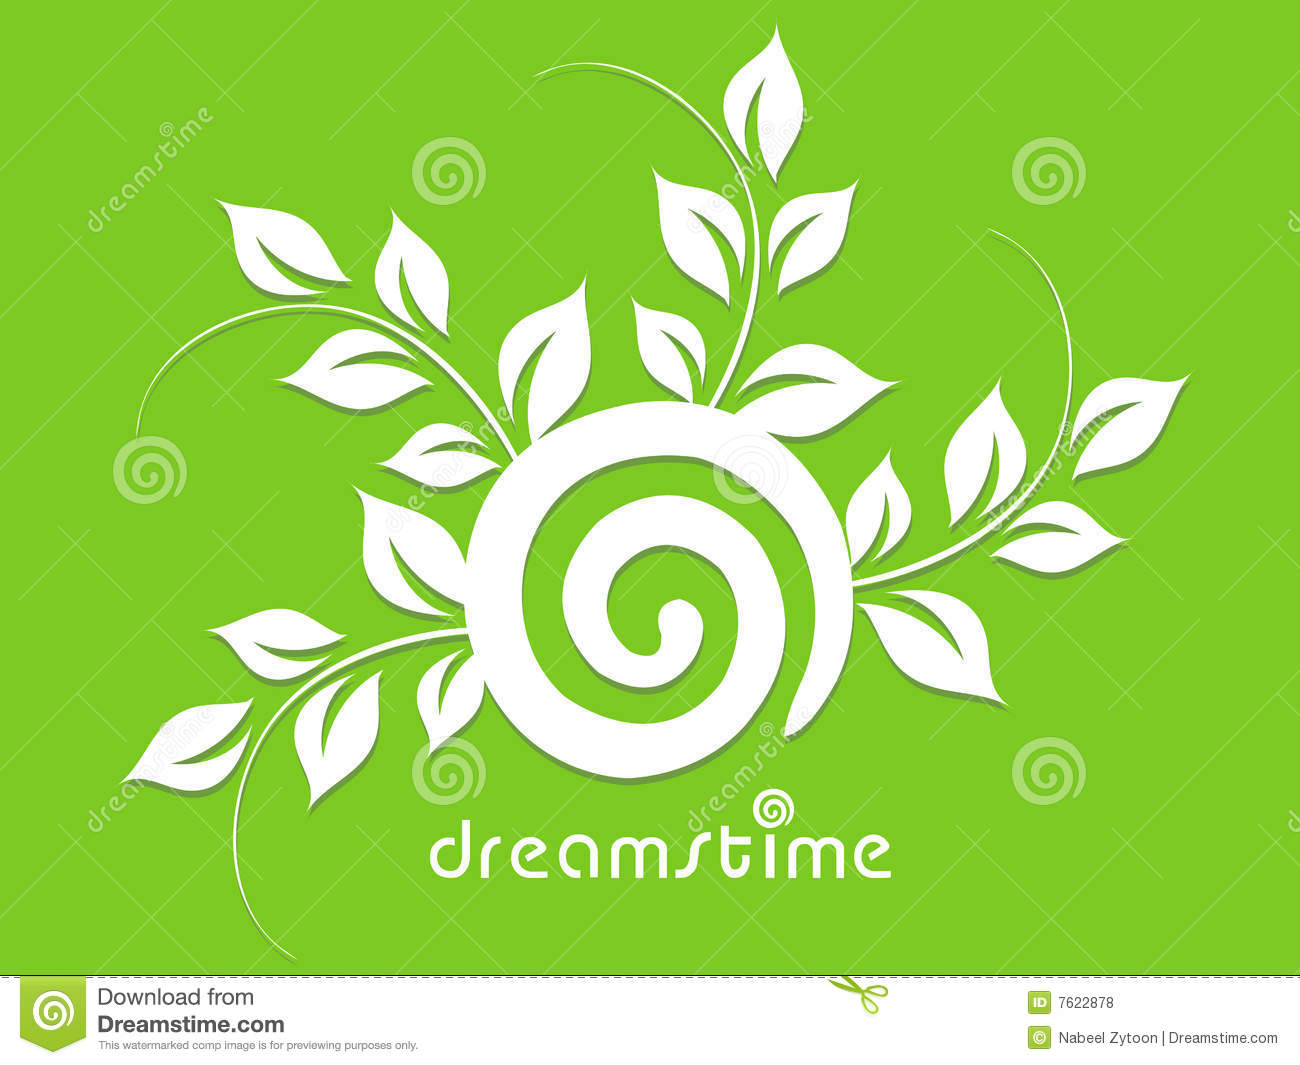 save more money by using Dreamstime promo codes